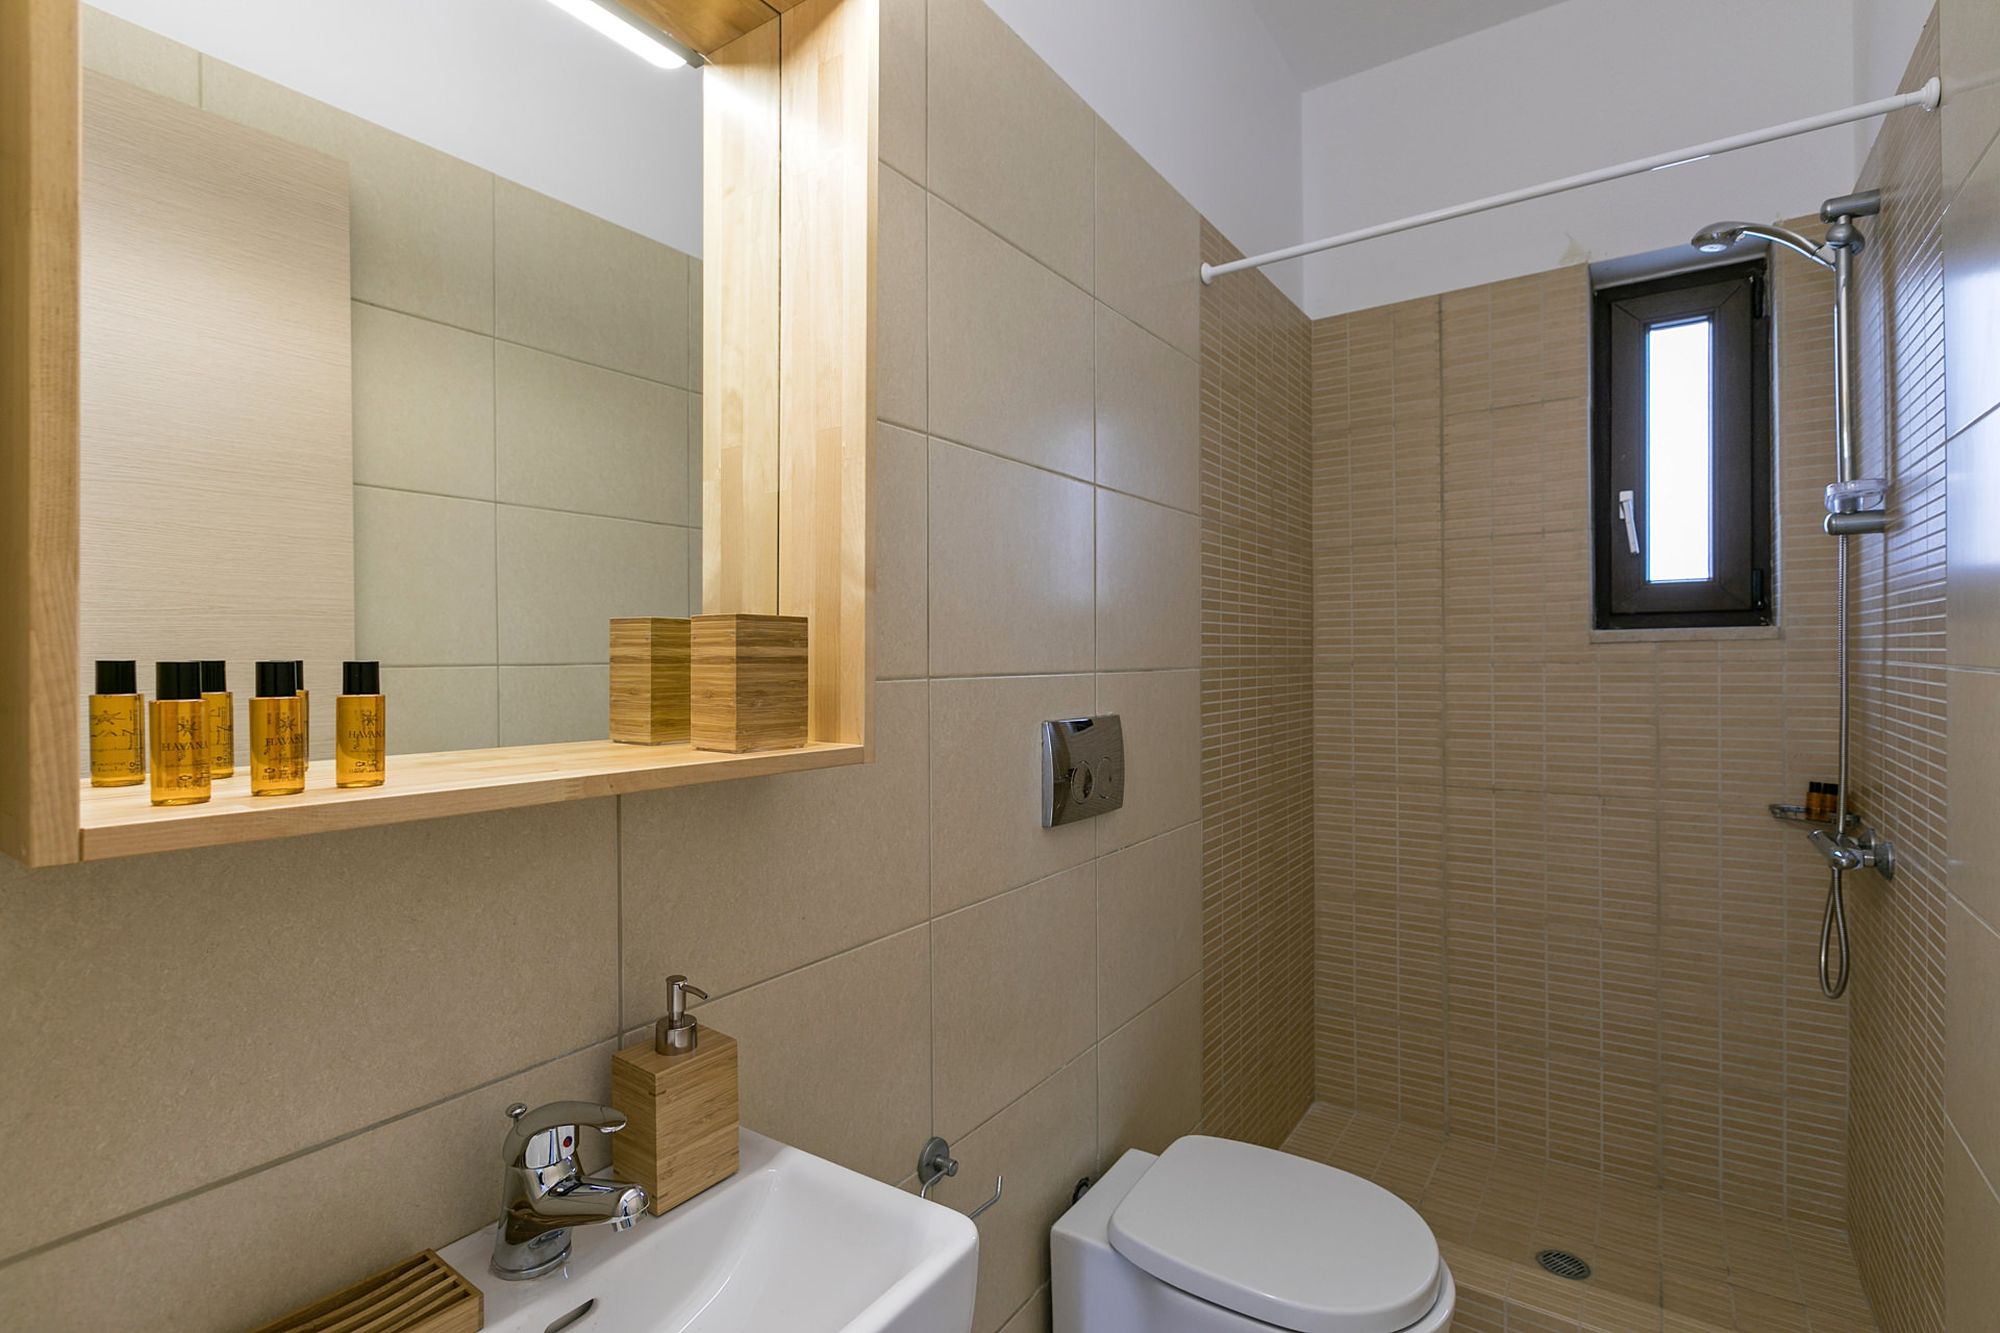 A modern bathroom with a shower and a big wooden mirror over the white washbasin.